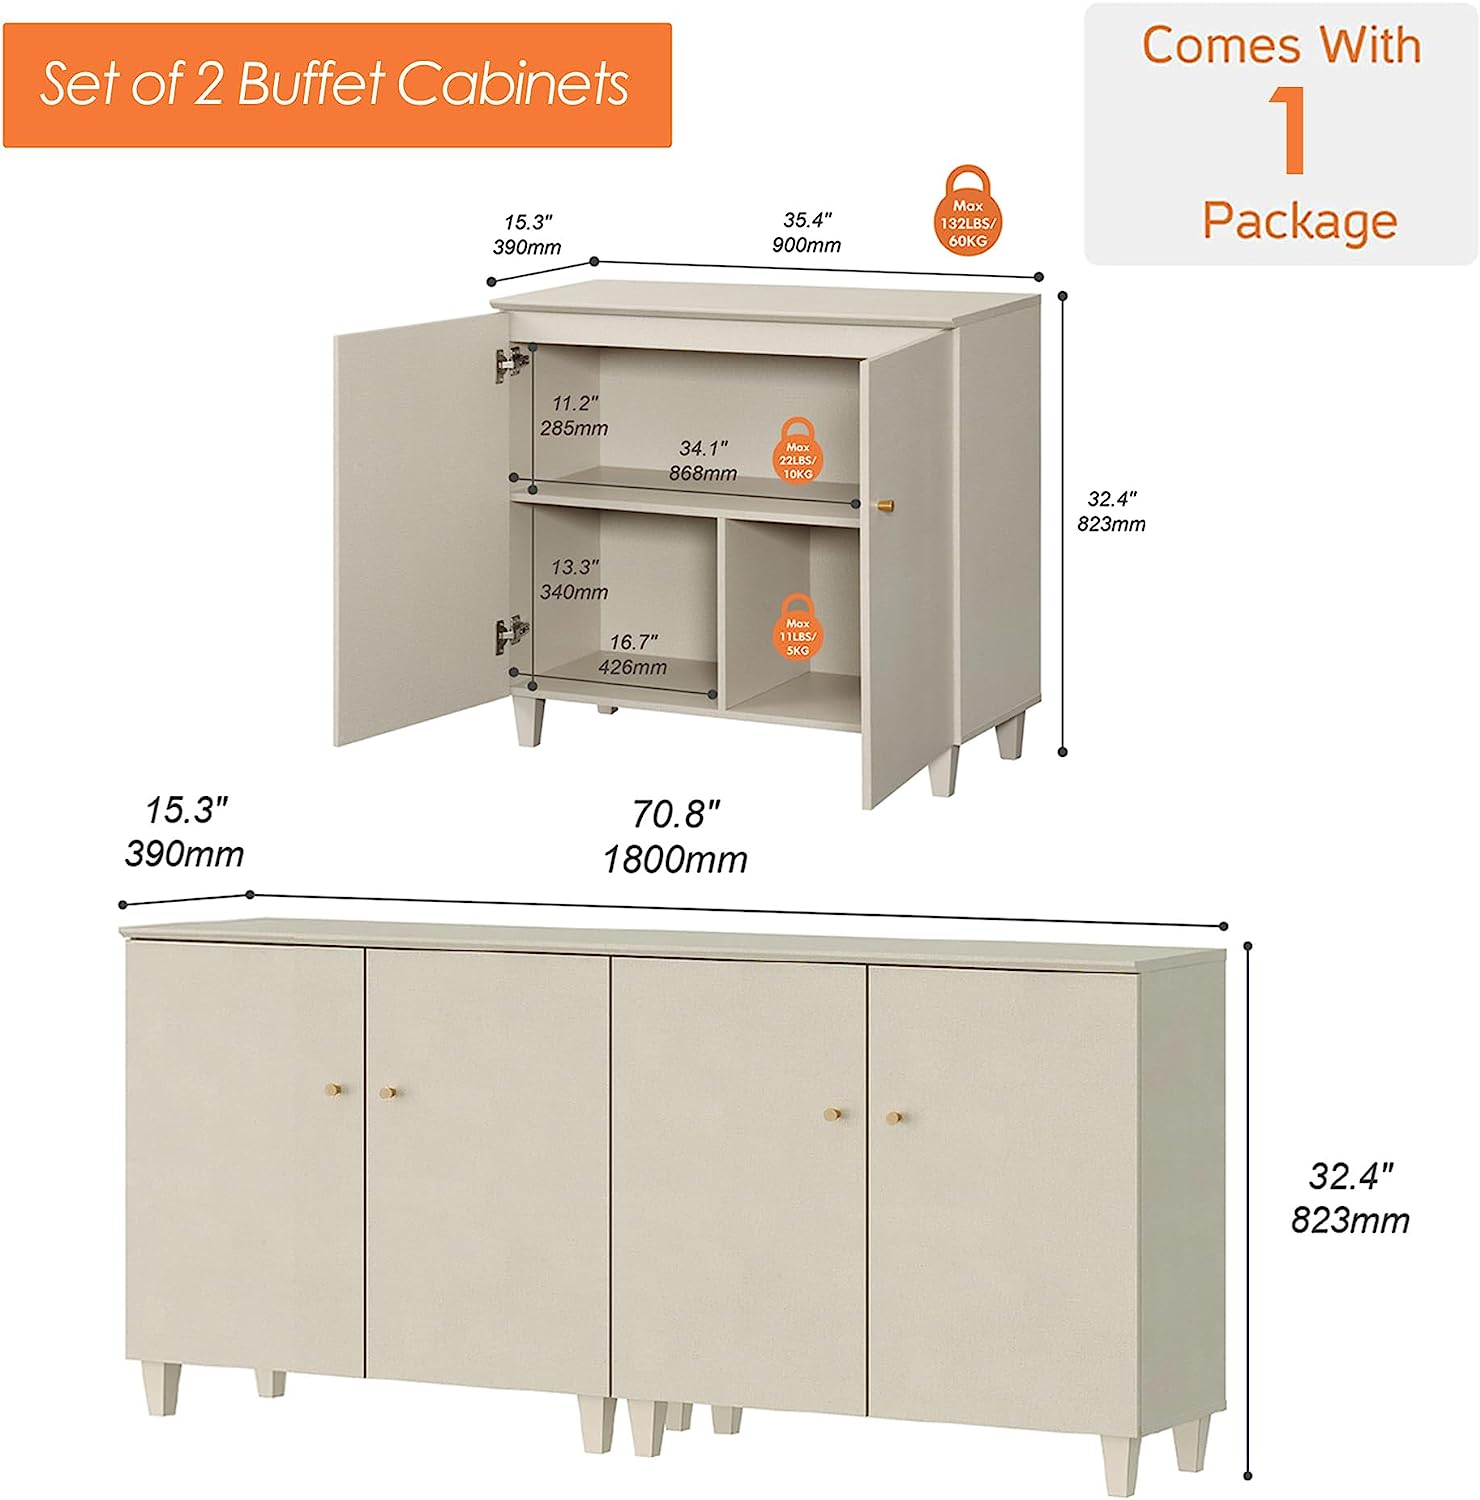 WAMPAT 70.8" Sideboard Buffet Server Cabinets with Doors, Kitchen Wood Coffee Bar Tables, Set of 2 Storage Cabinets with 6 Compartments for Dining Room, Living Room, Entryway, Beige